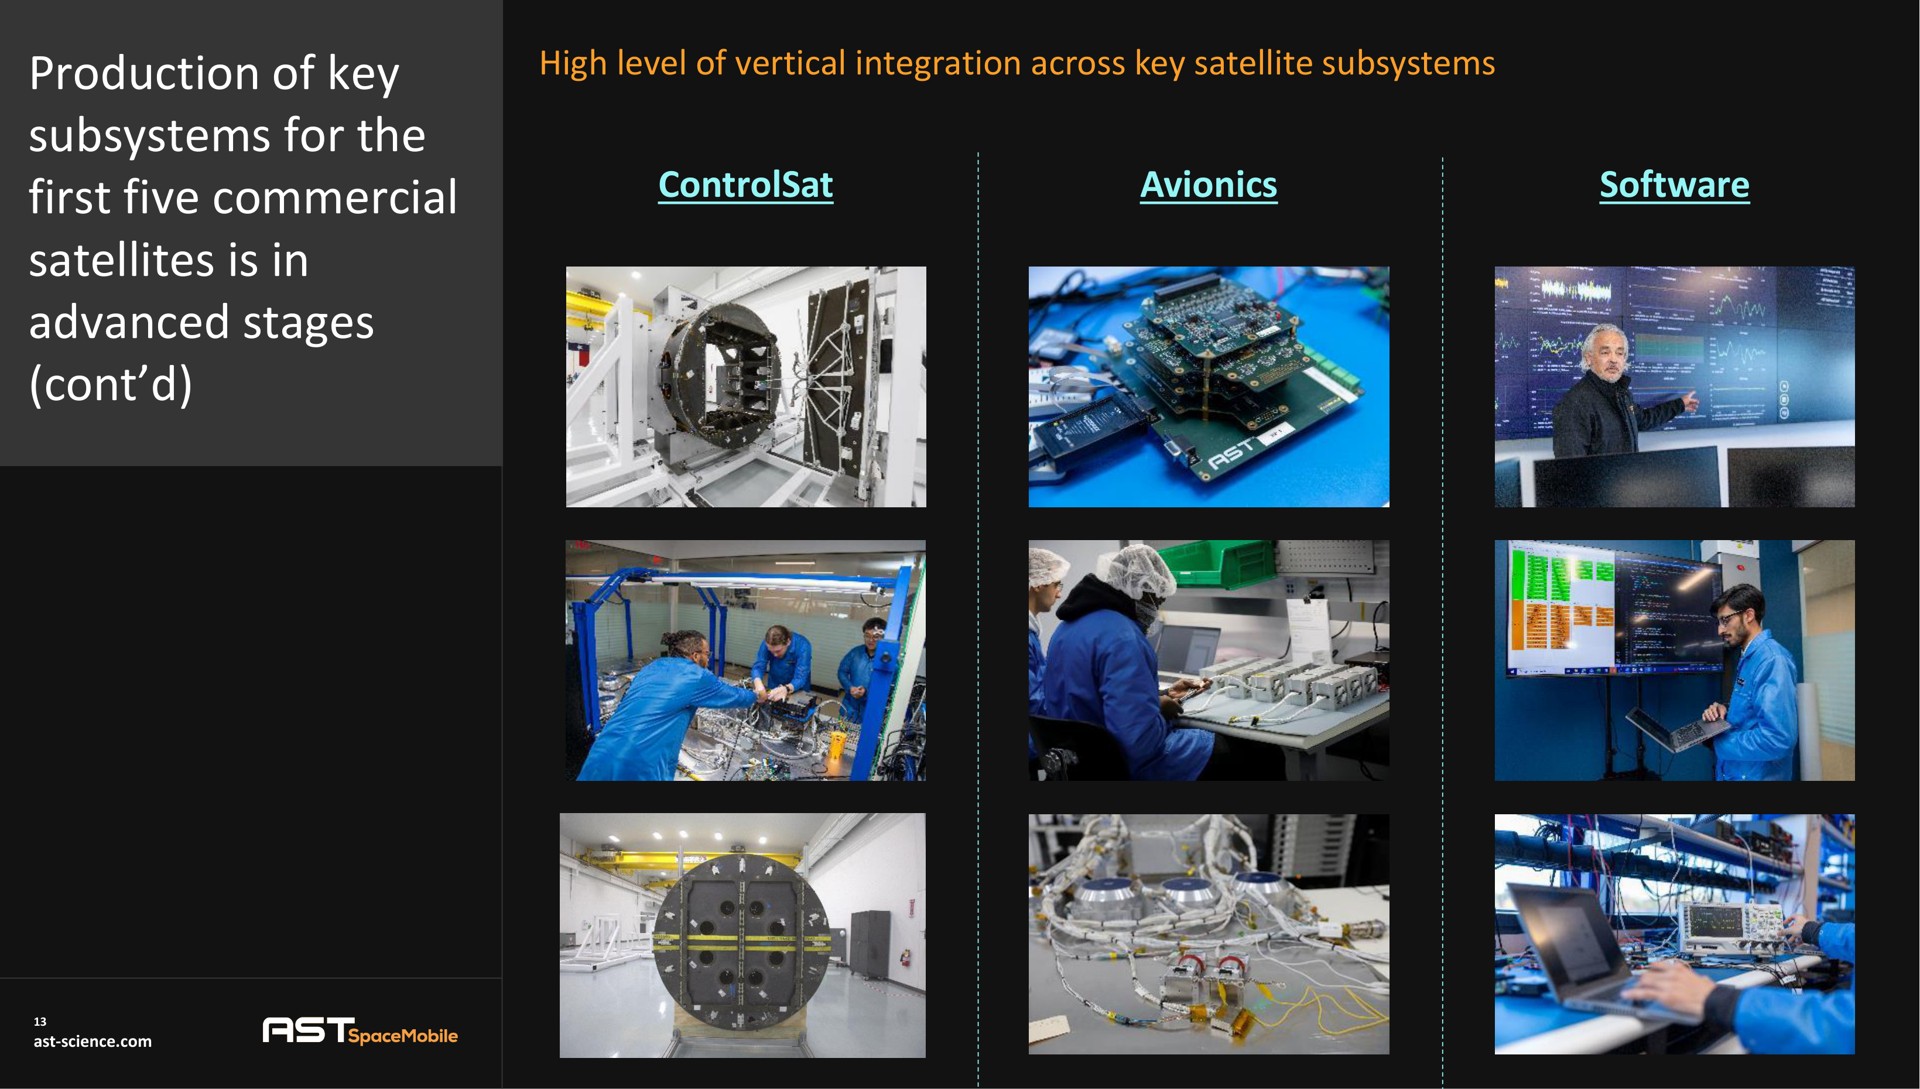 high level of vertical integration across key satellite subsystems production of key subsystems for the first five commercial satellites is in advanced stages an reel a | AST SpaceMobile